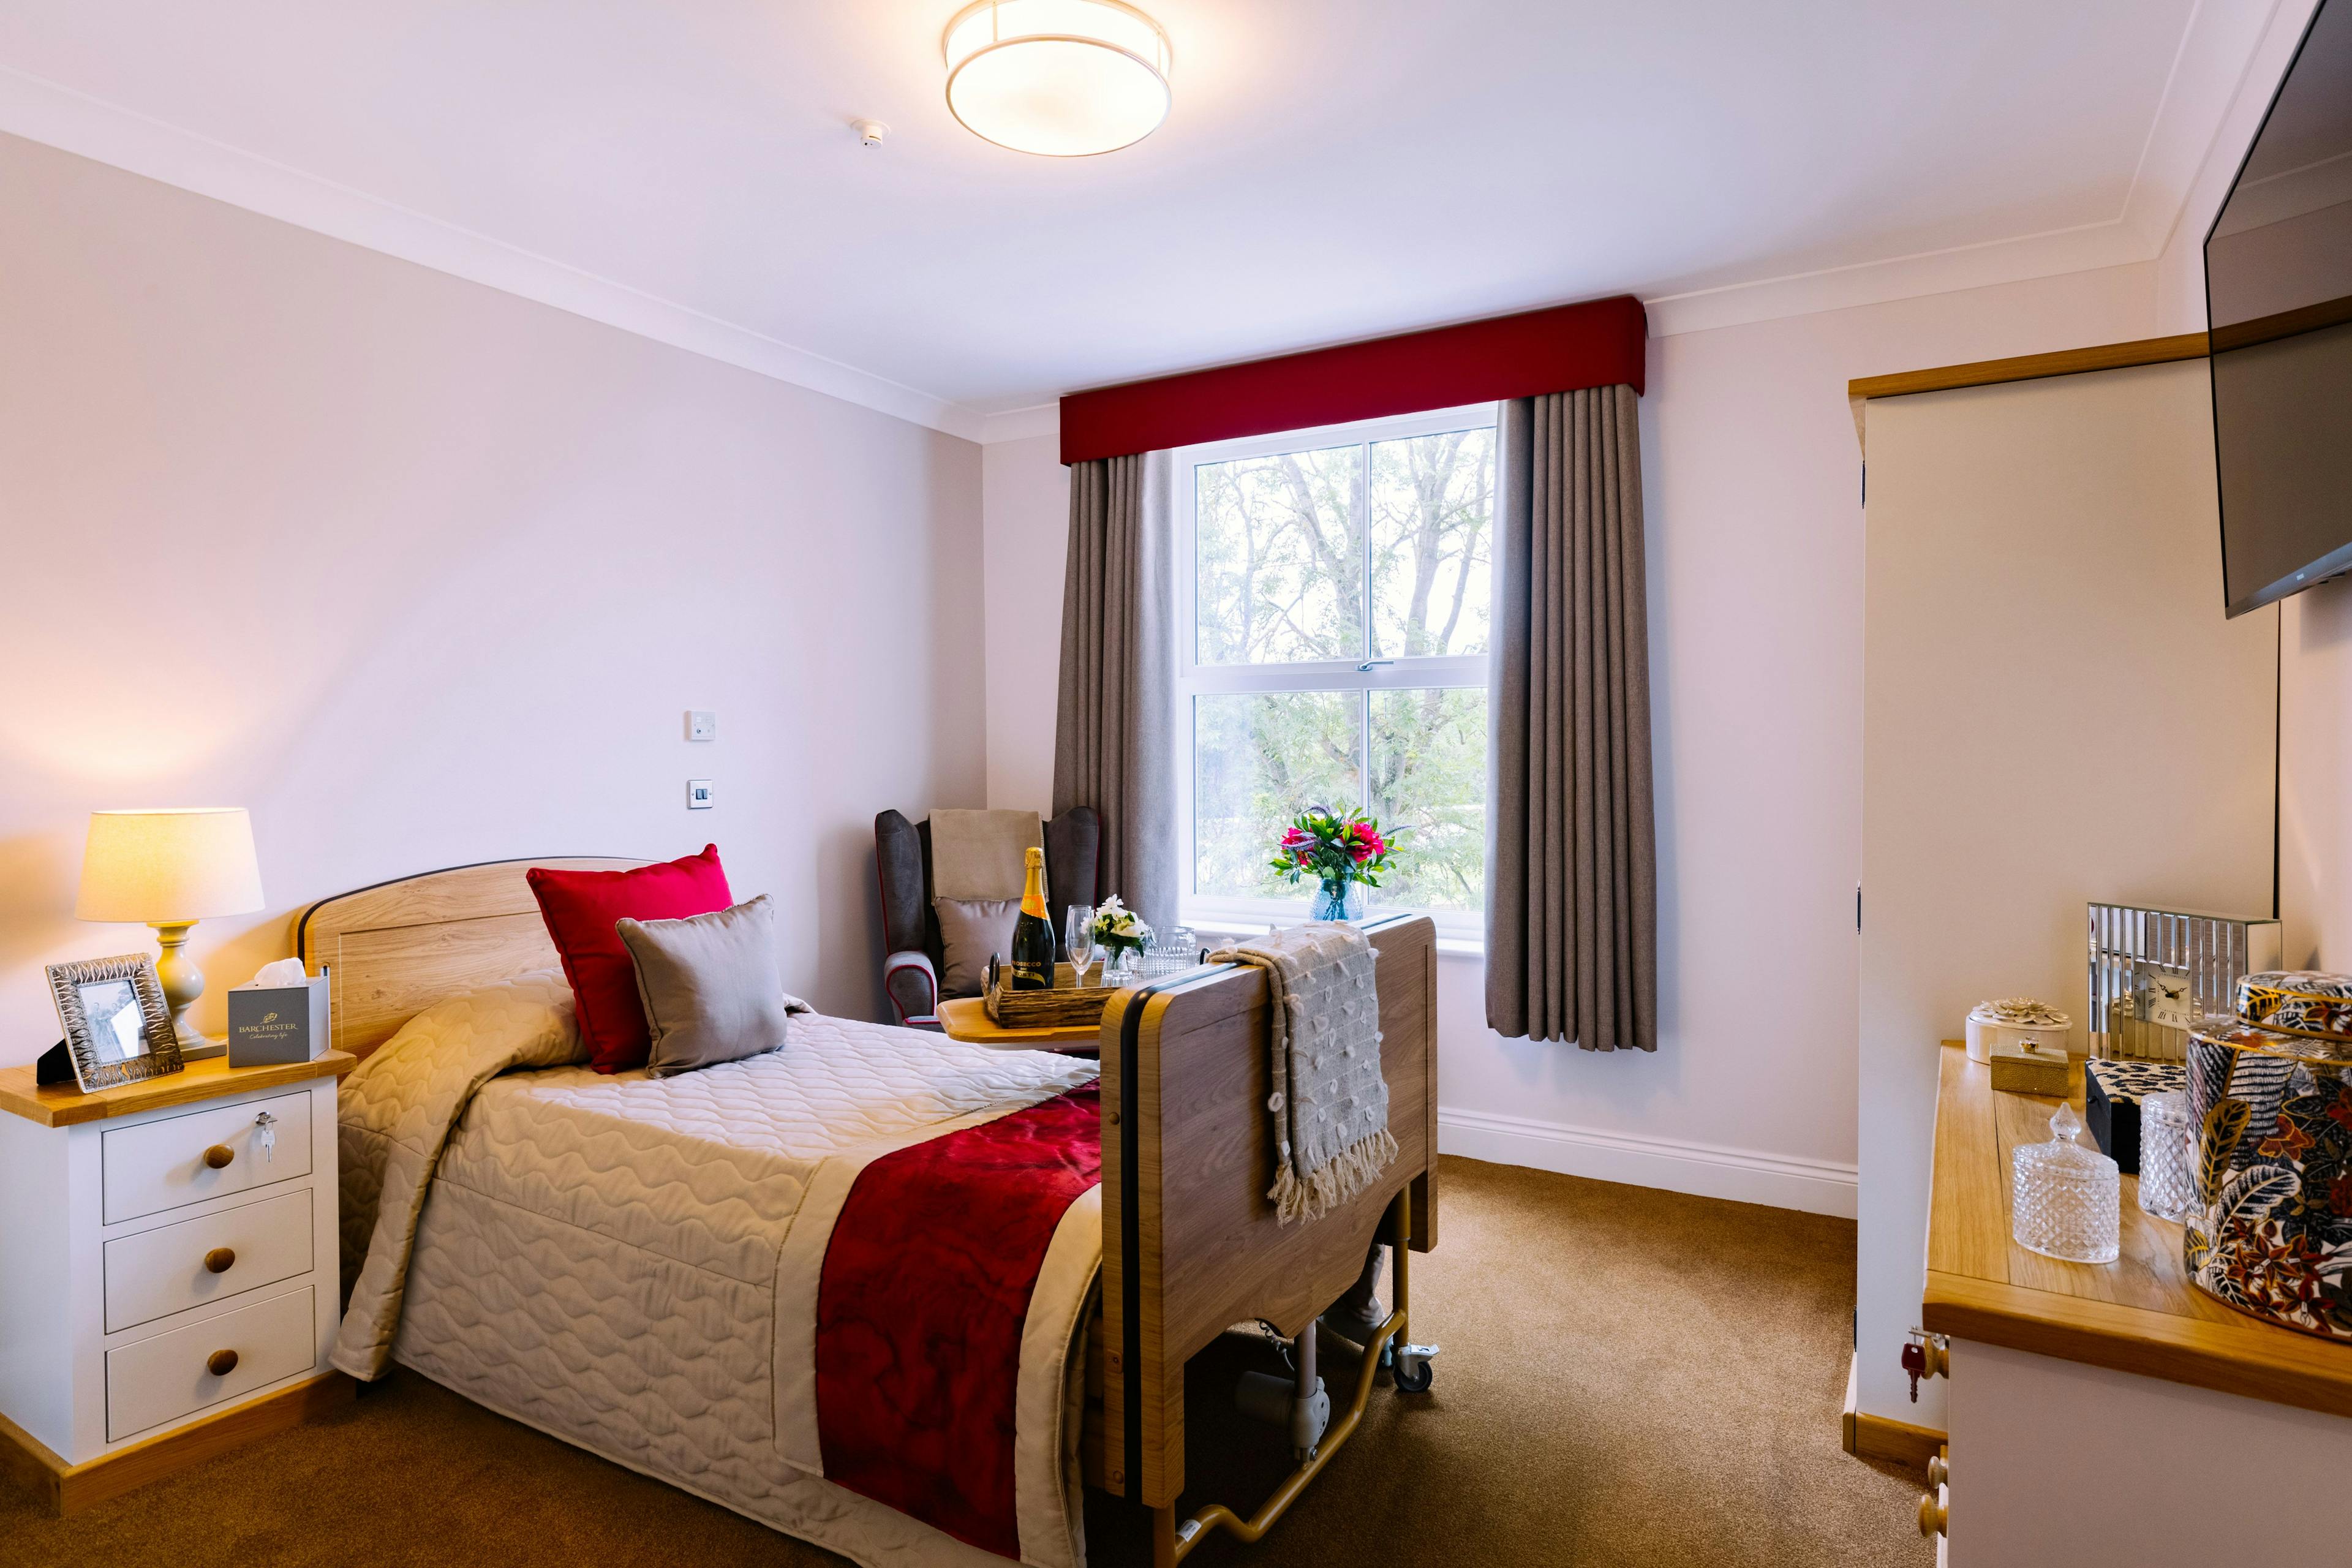 Bedroom at Ouse View Care Home in York, North Yorkshire